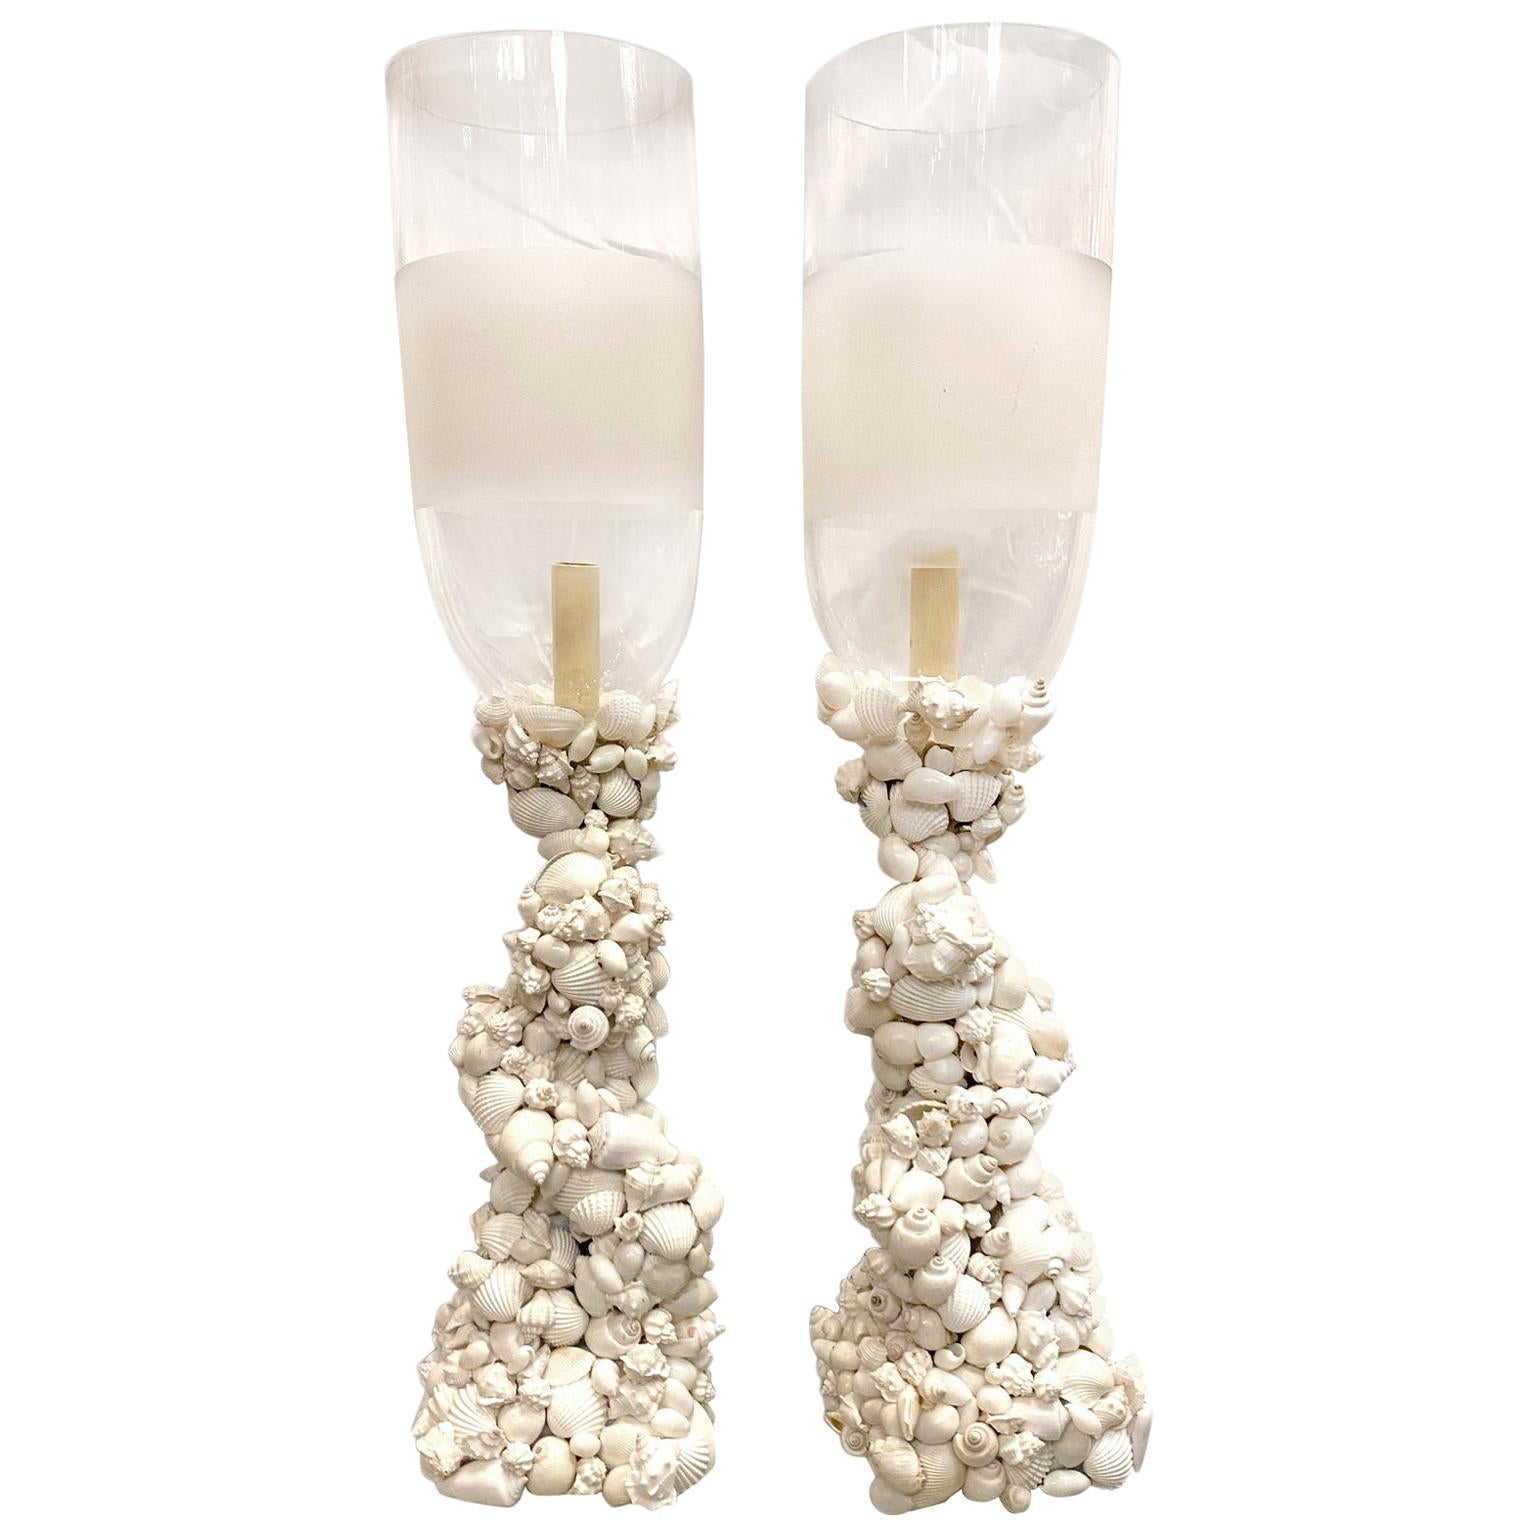 Pair of Shell Table Lamps with Glass Shades